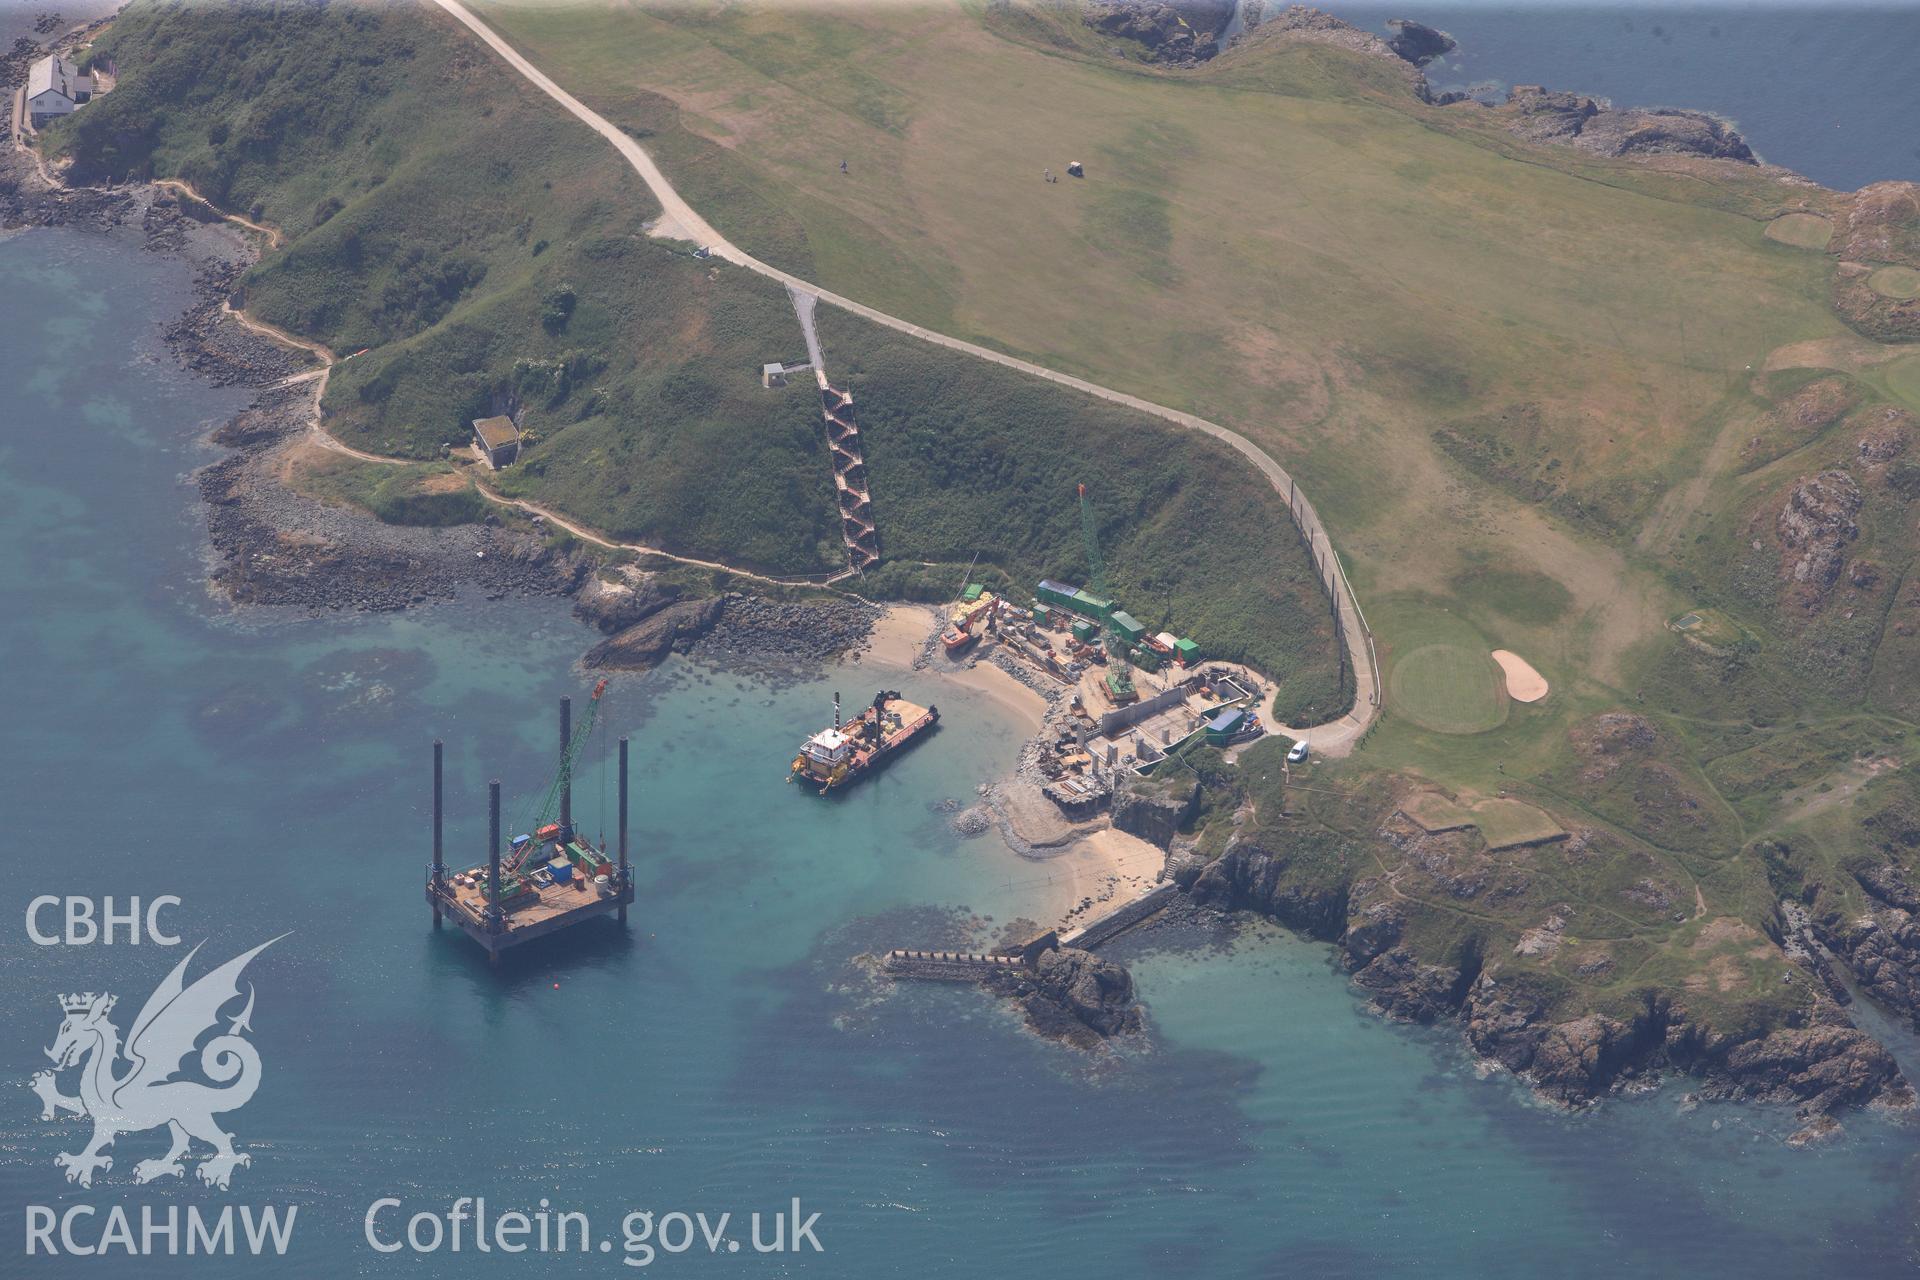 Lifeboat House, Lighthouse, Old Pier and Trwyn Porth Dinllaen Promontory Enclosure, Porth Dinllaen, Morfa Nefyn, on the Lleyn Peninsula. Oblique aerial photograph taken during the Royal Commission?s programme of archaeological aerial reconnaissance by Toby Driver on 12th July 2013.